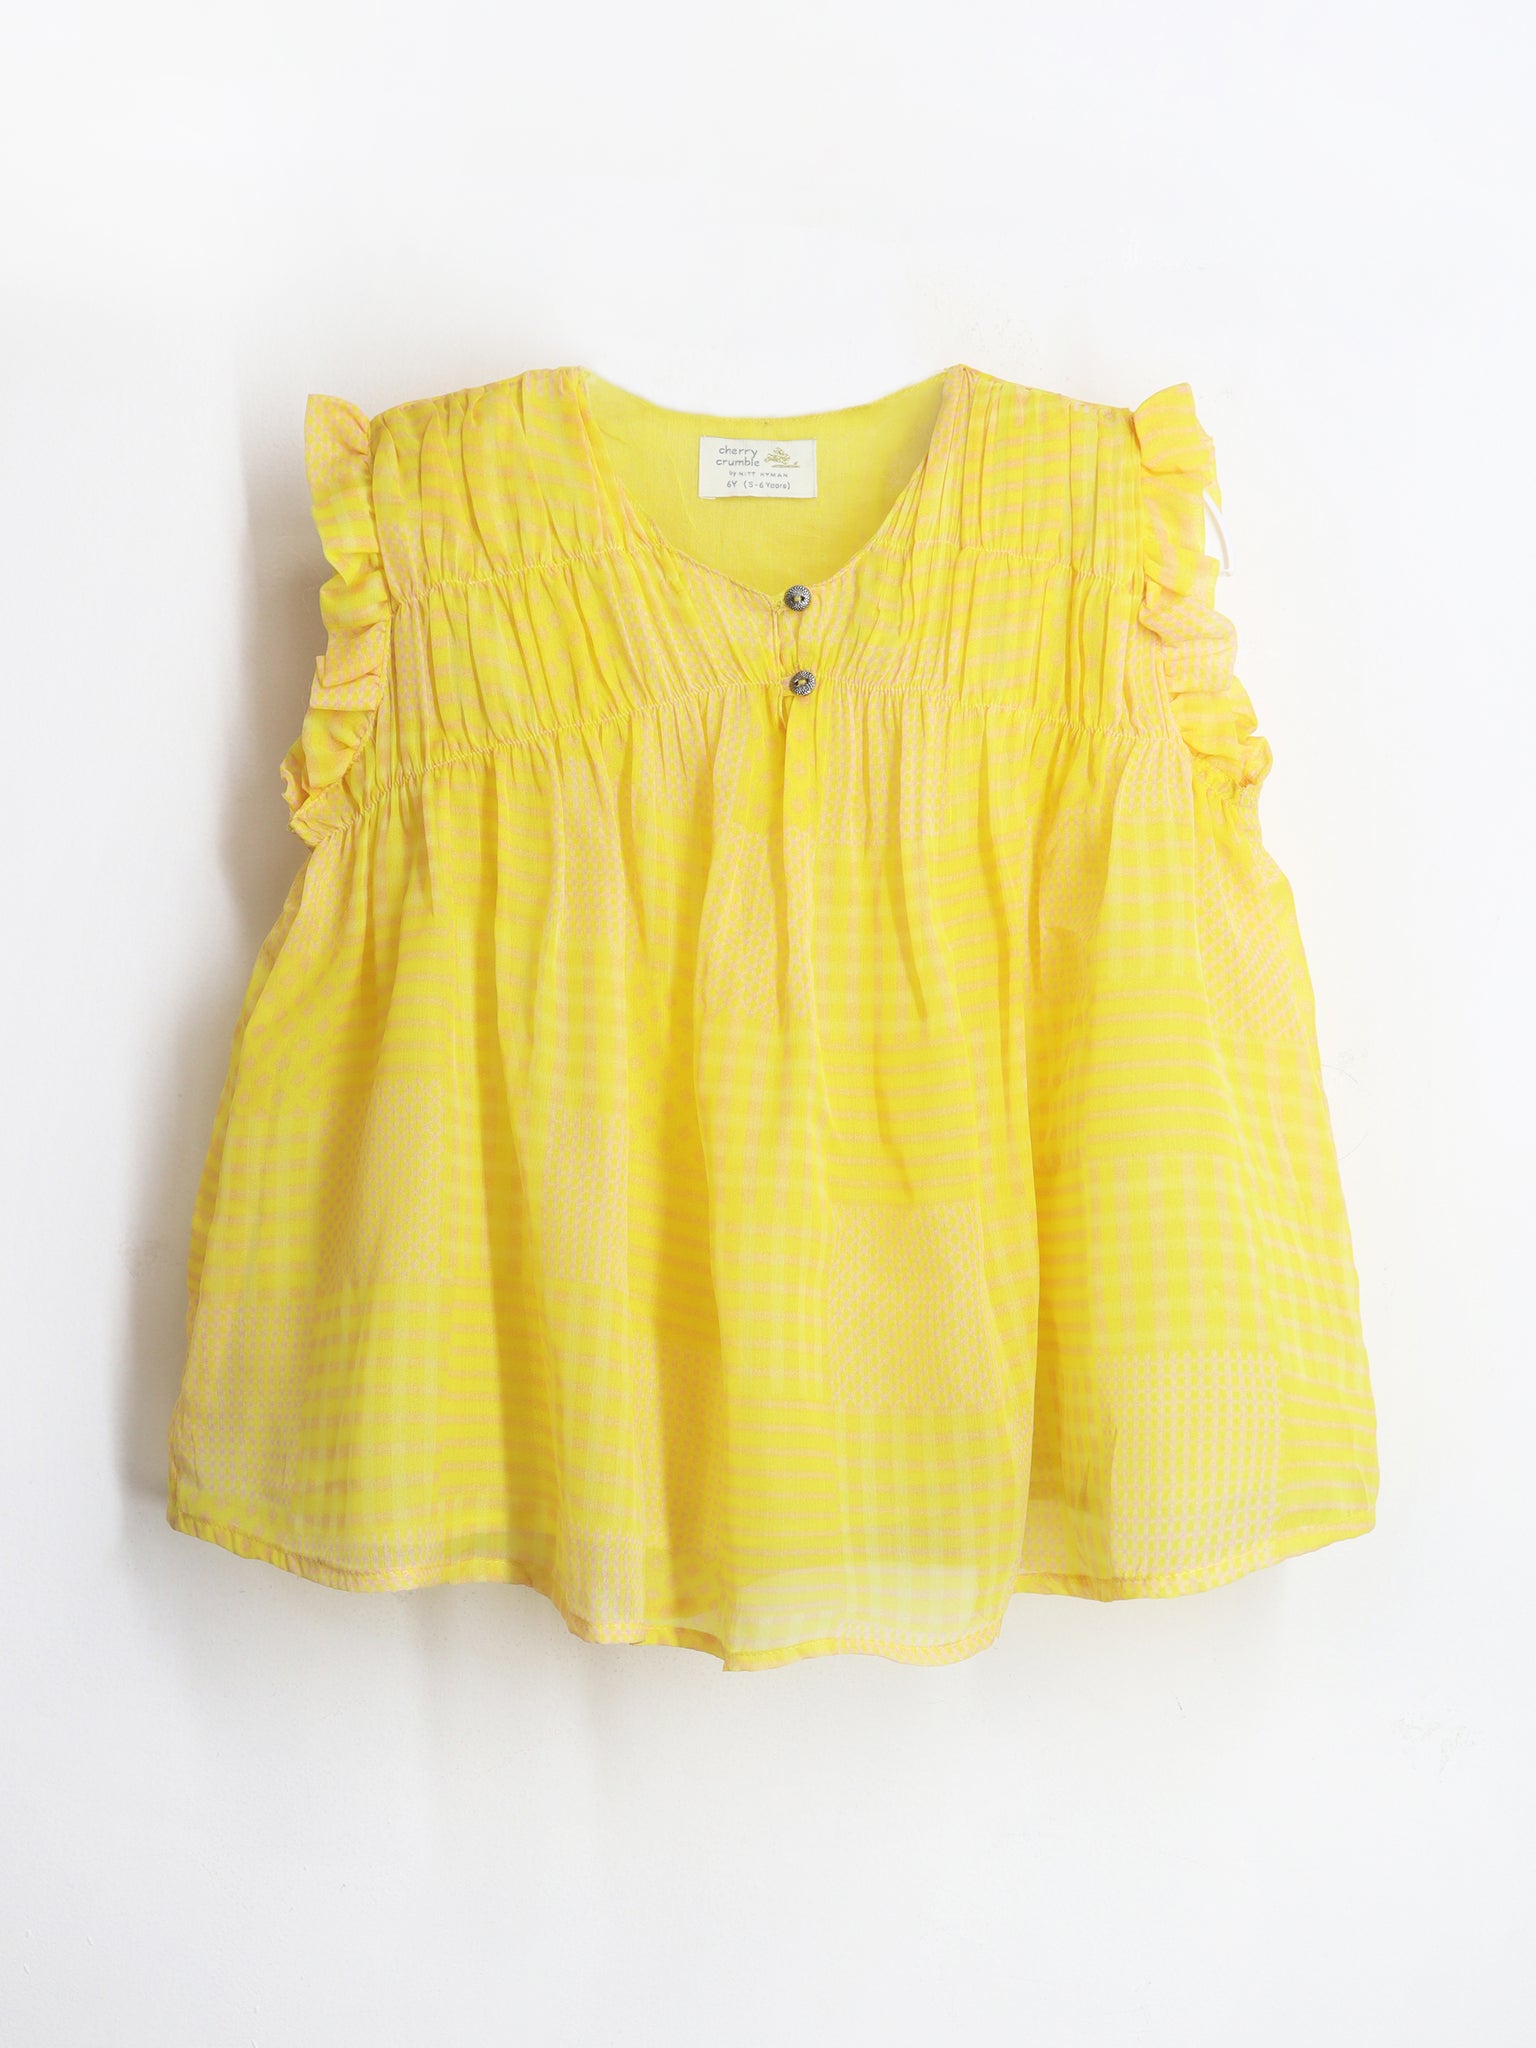 Cherry Crumble Smart Casual Mustard Cotton Blend Round Neck with Button closure Smockey Top For Girls